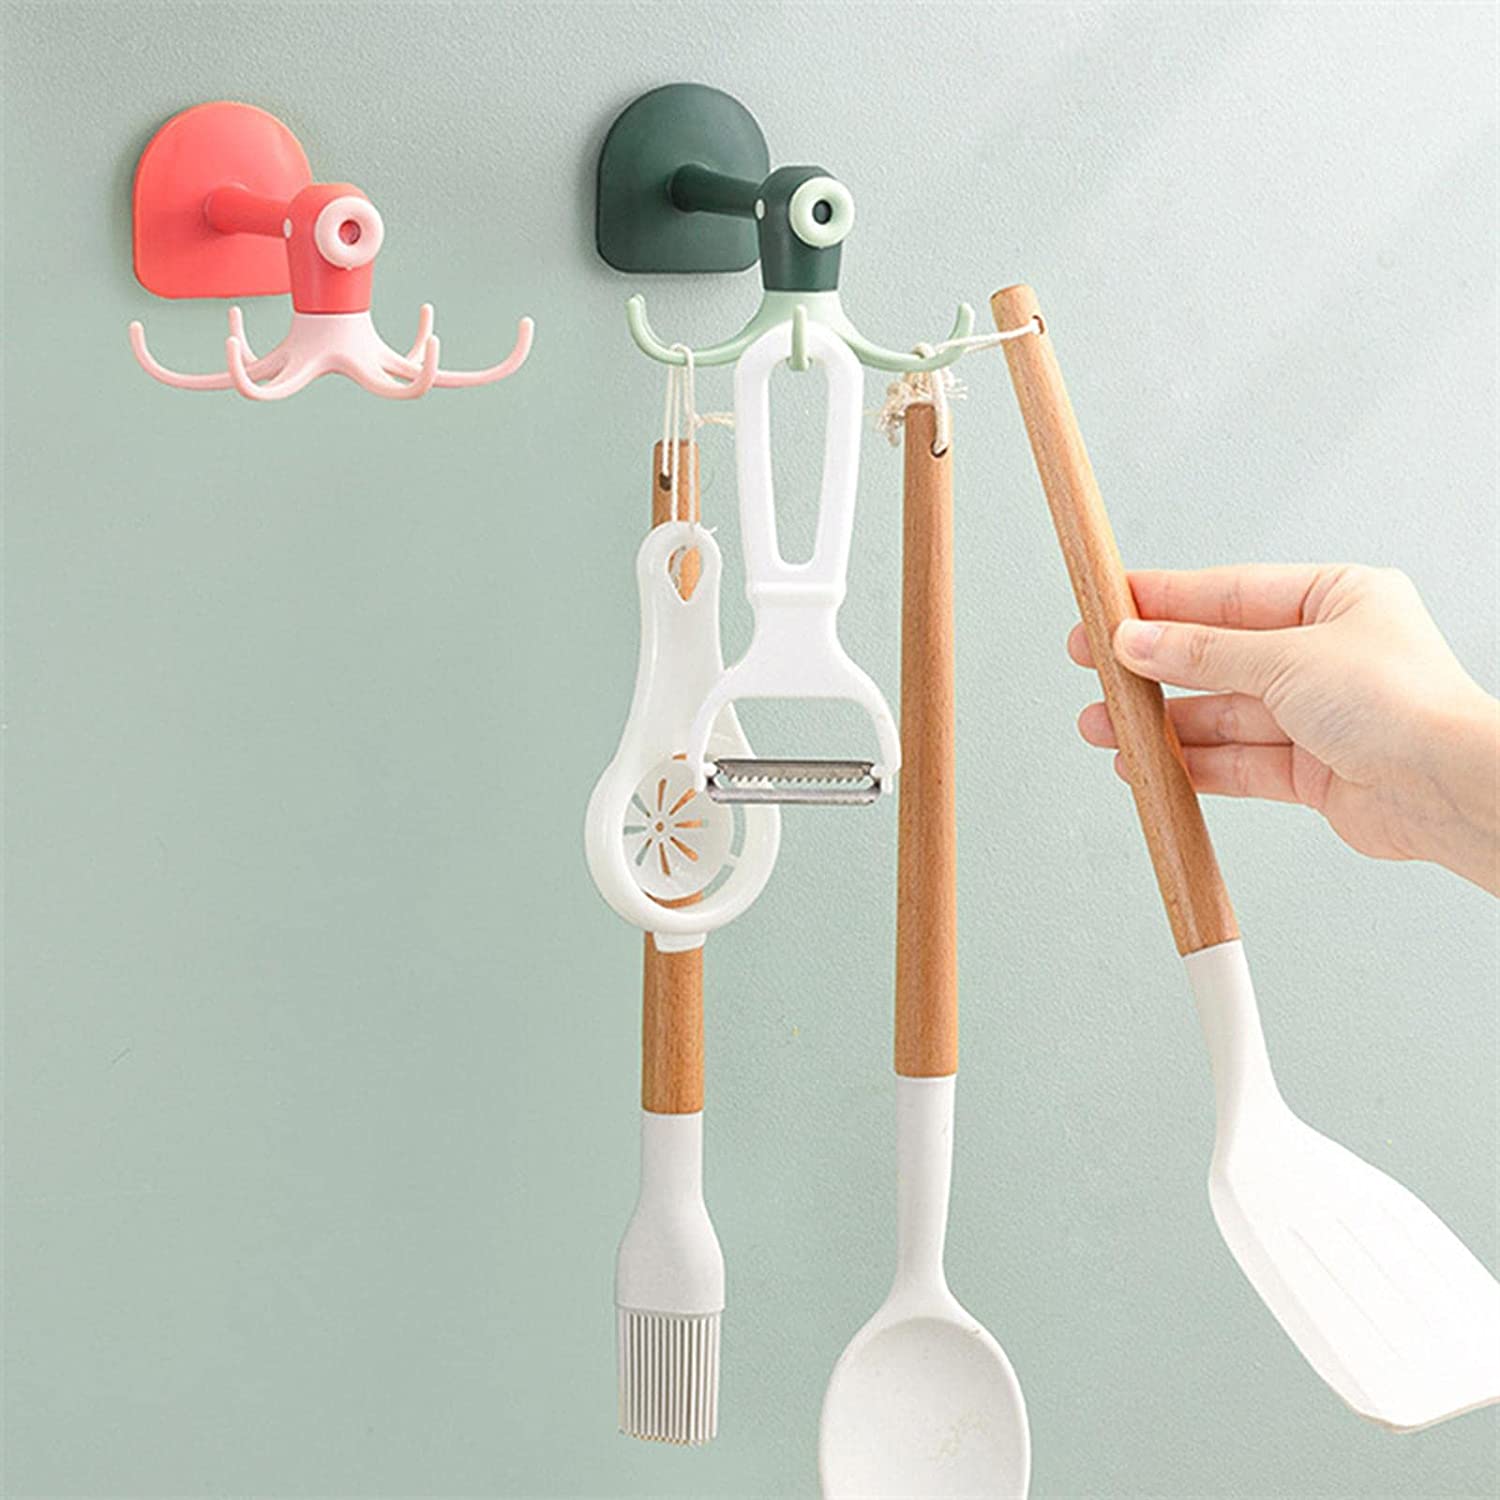 A person holding utensils in front of a Wall Mount Octopus Hook, ready to hang them up.